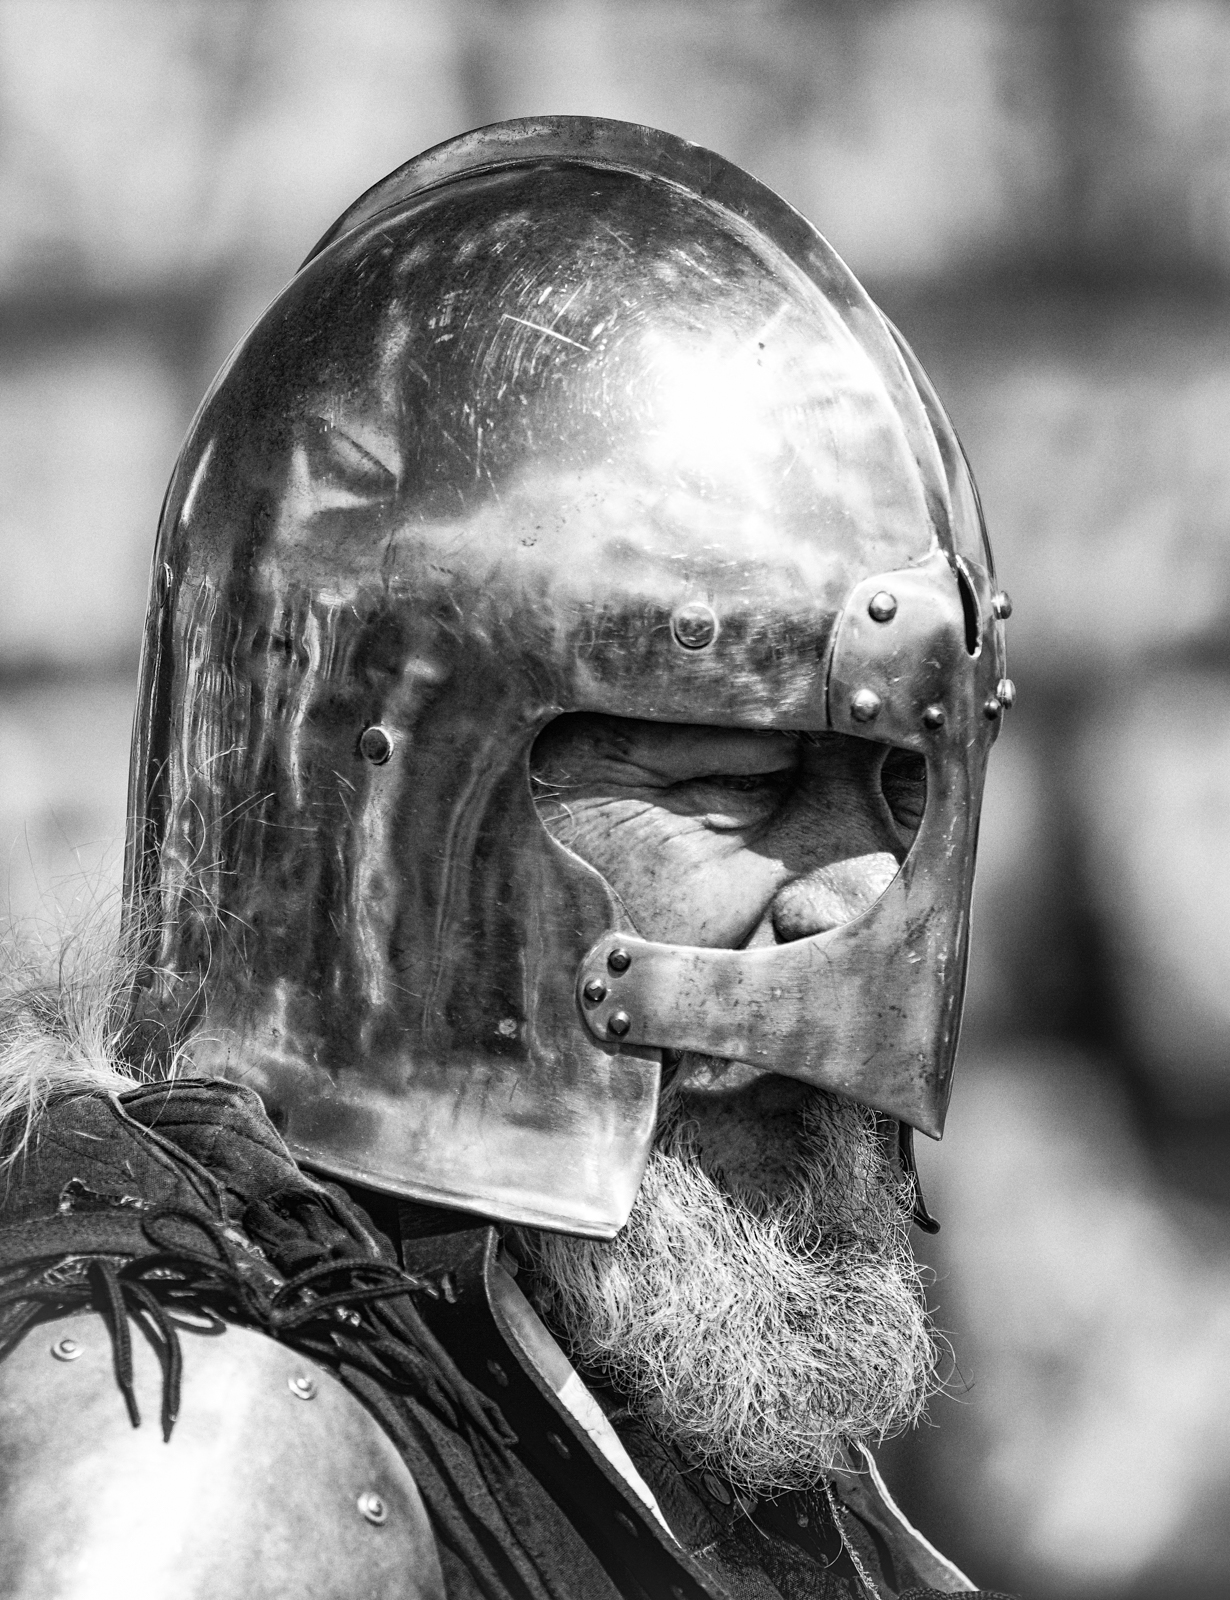 the helmet of a man is worn with a beard